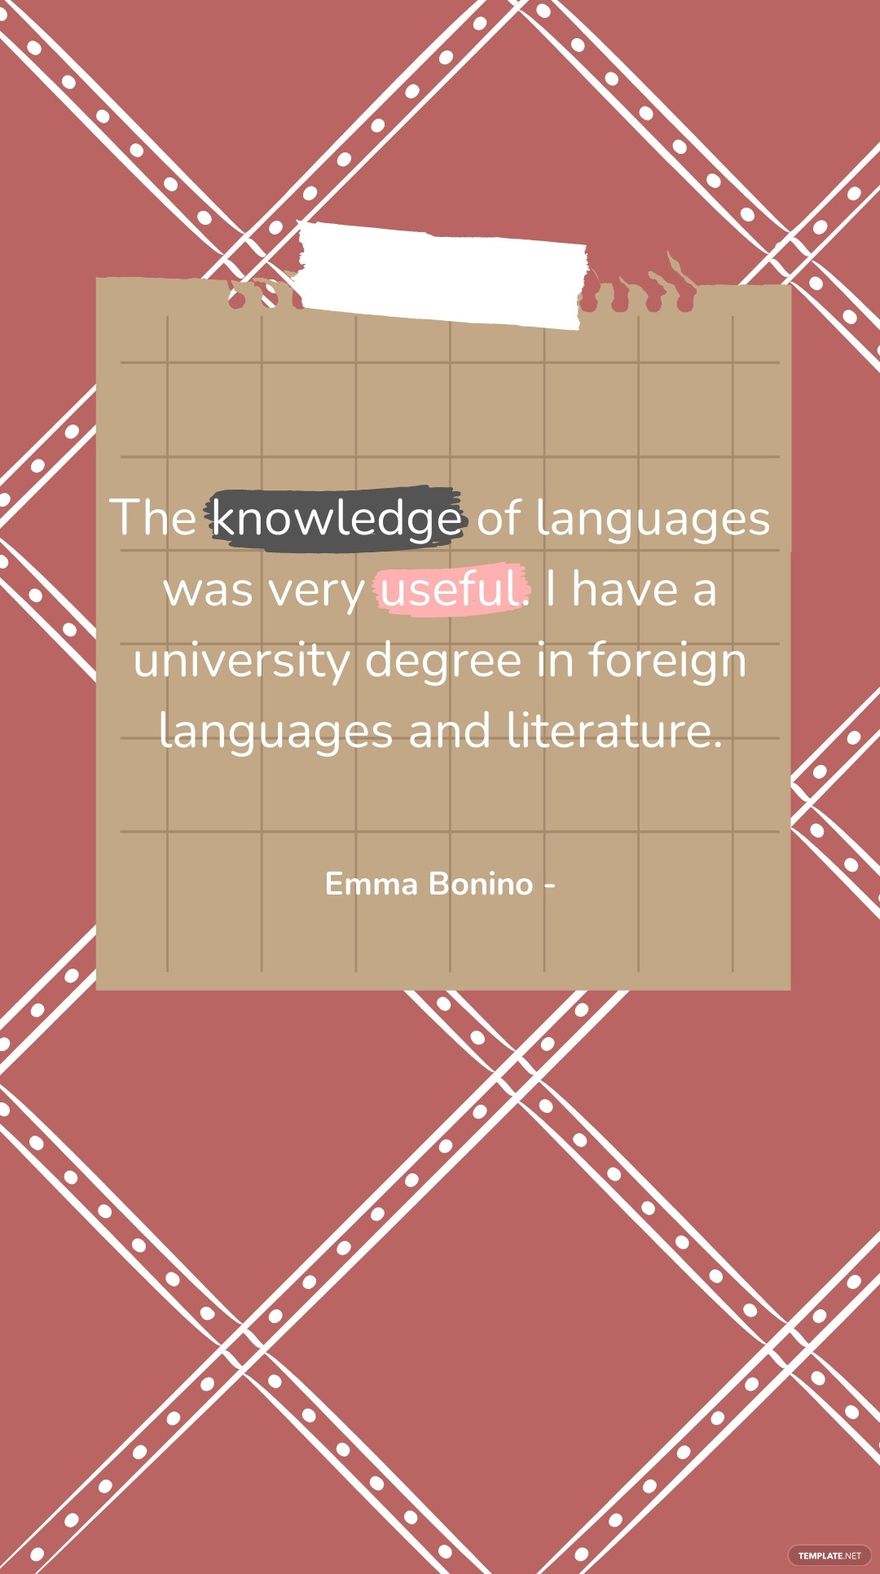 Free Emma Bonino - The knowledge of languages was very useful. I have a university degree in foreign languages and literature. in JPG